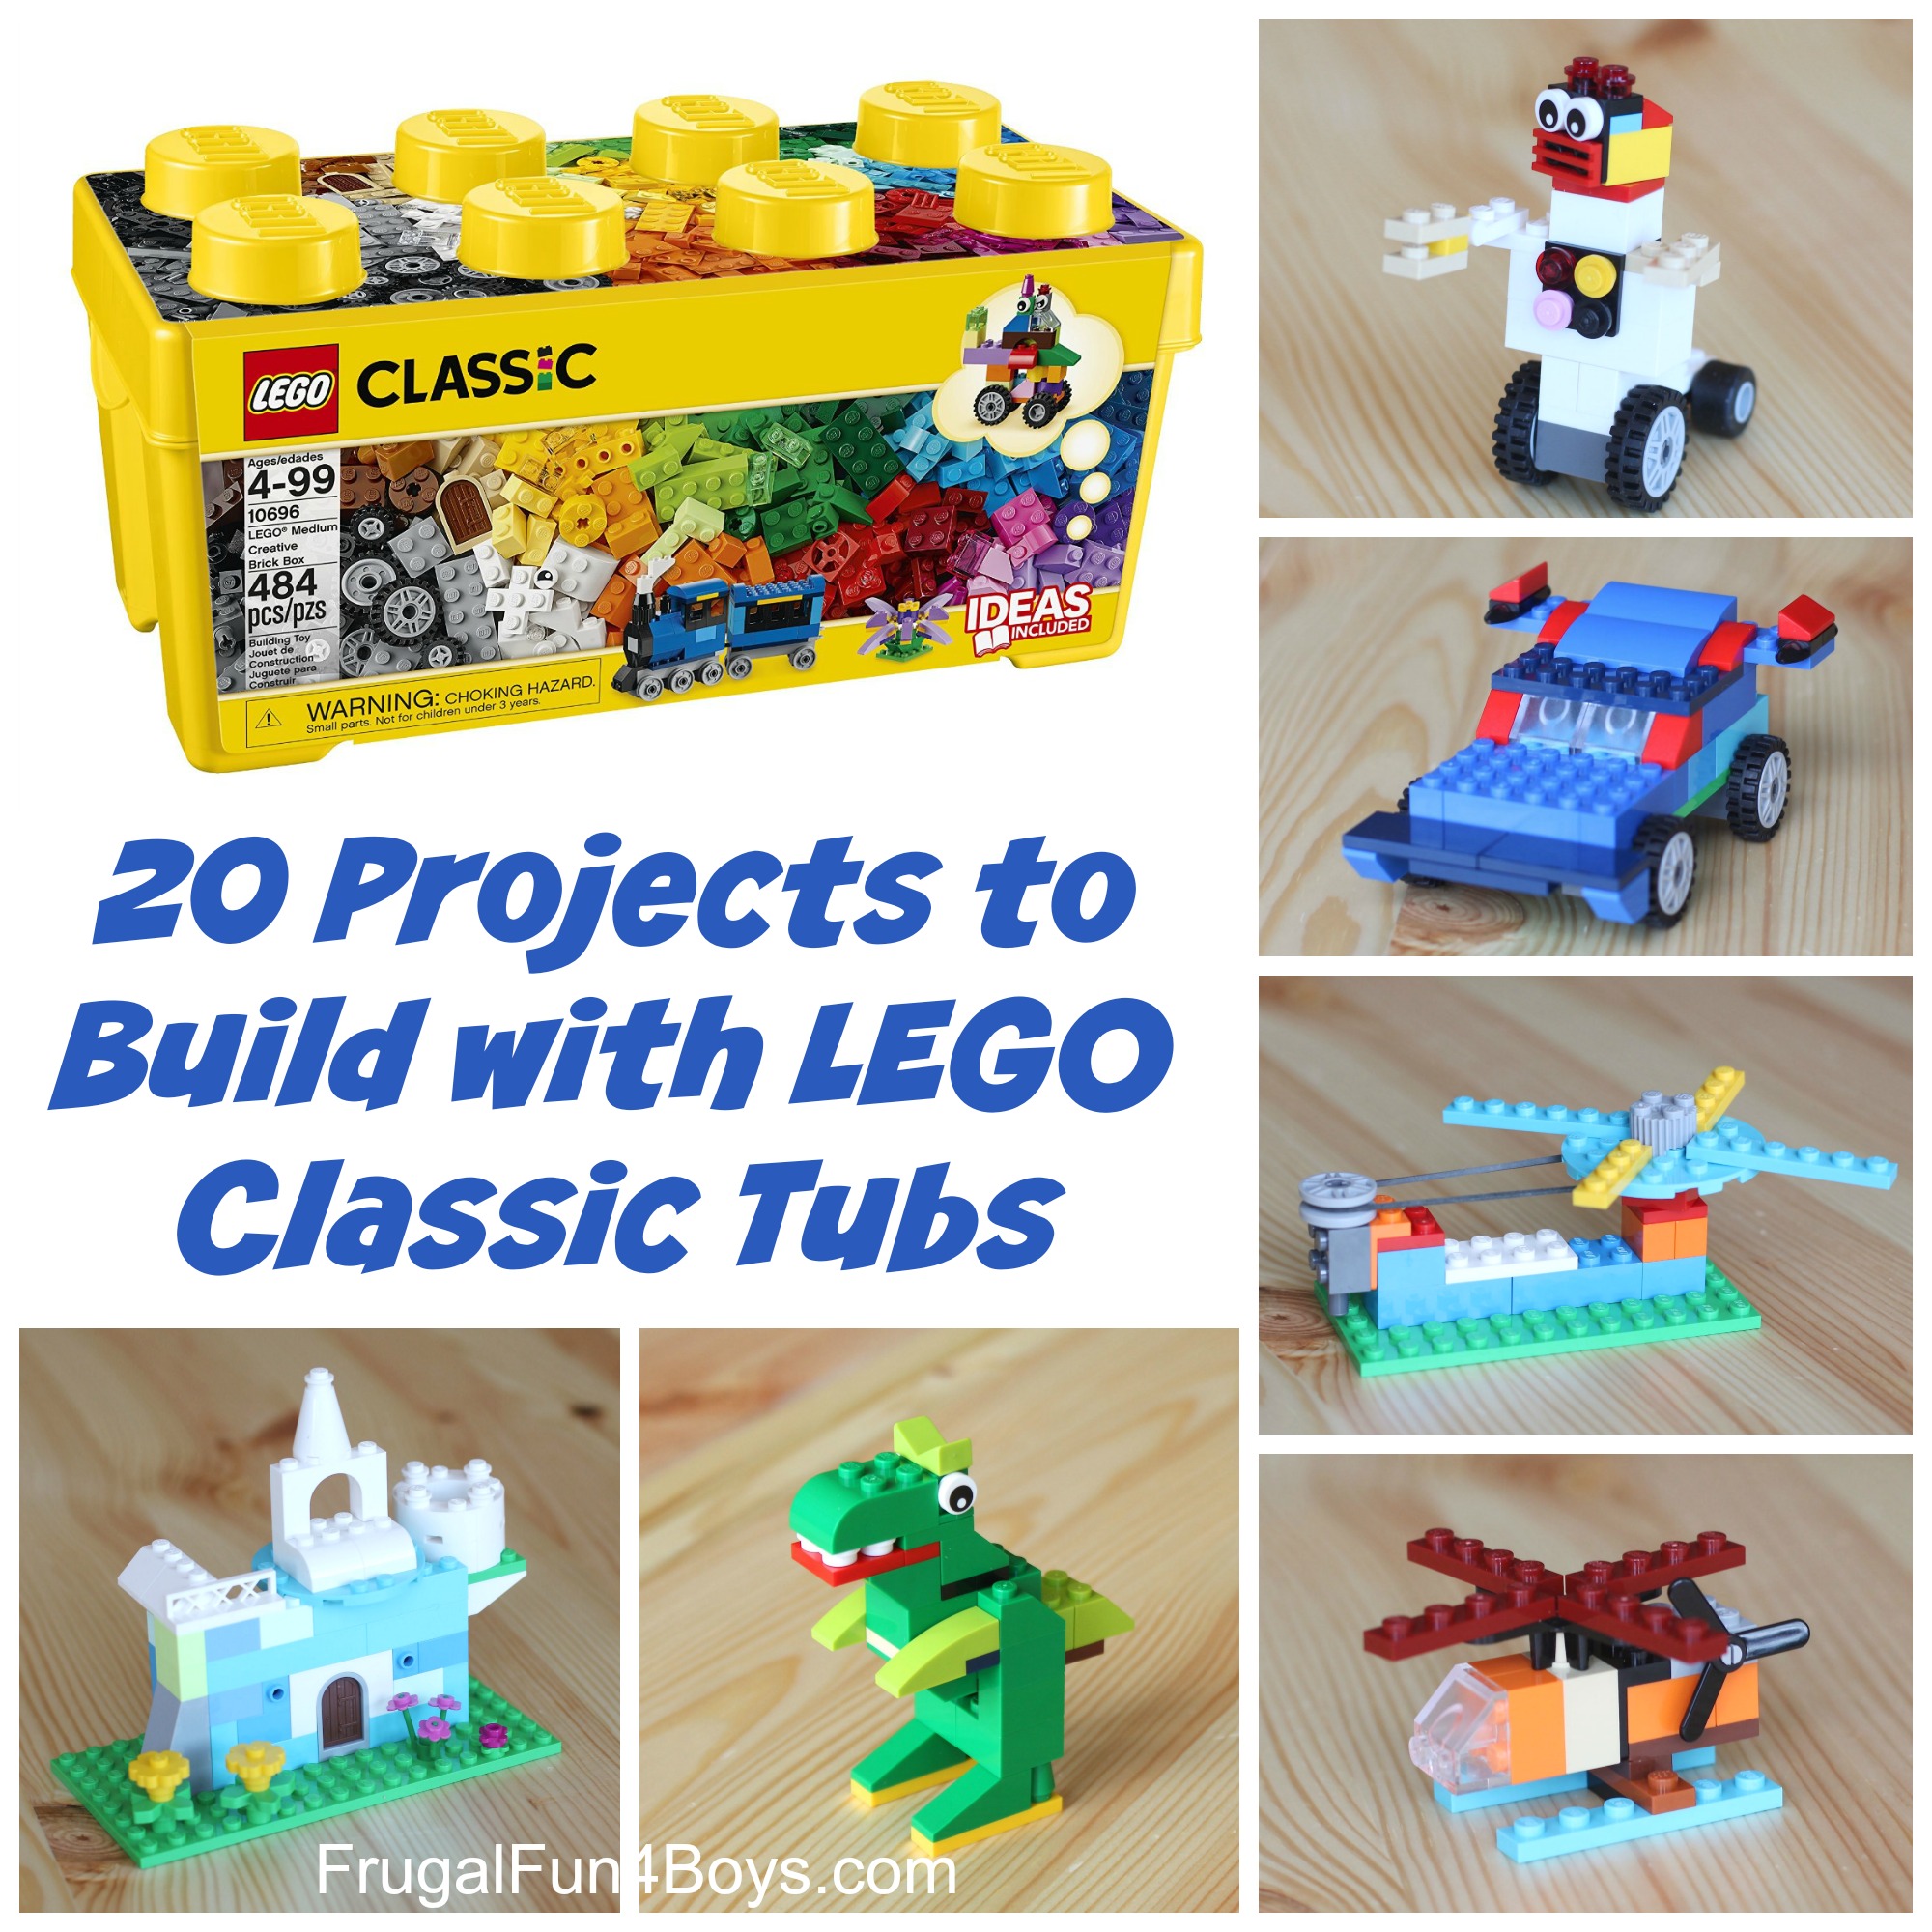 20 Projects to Build with LEGO Classic Tubs